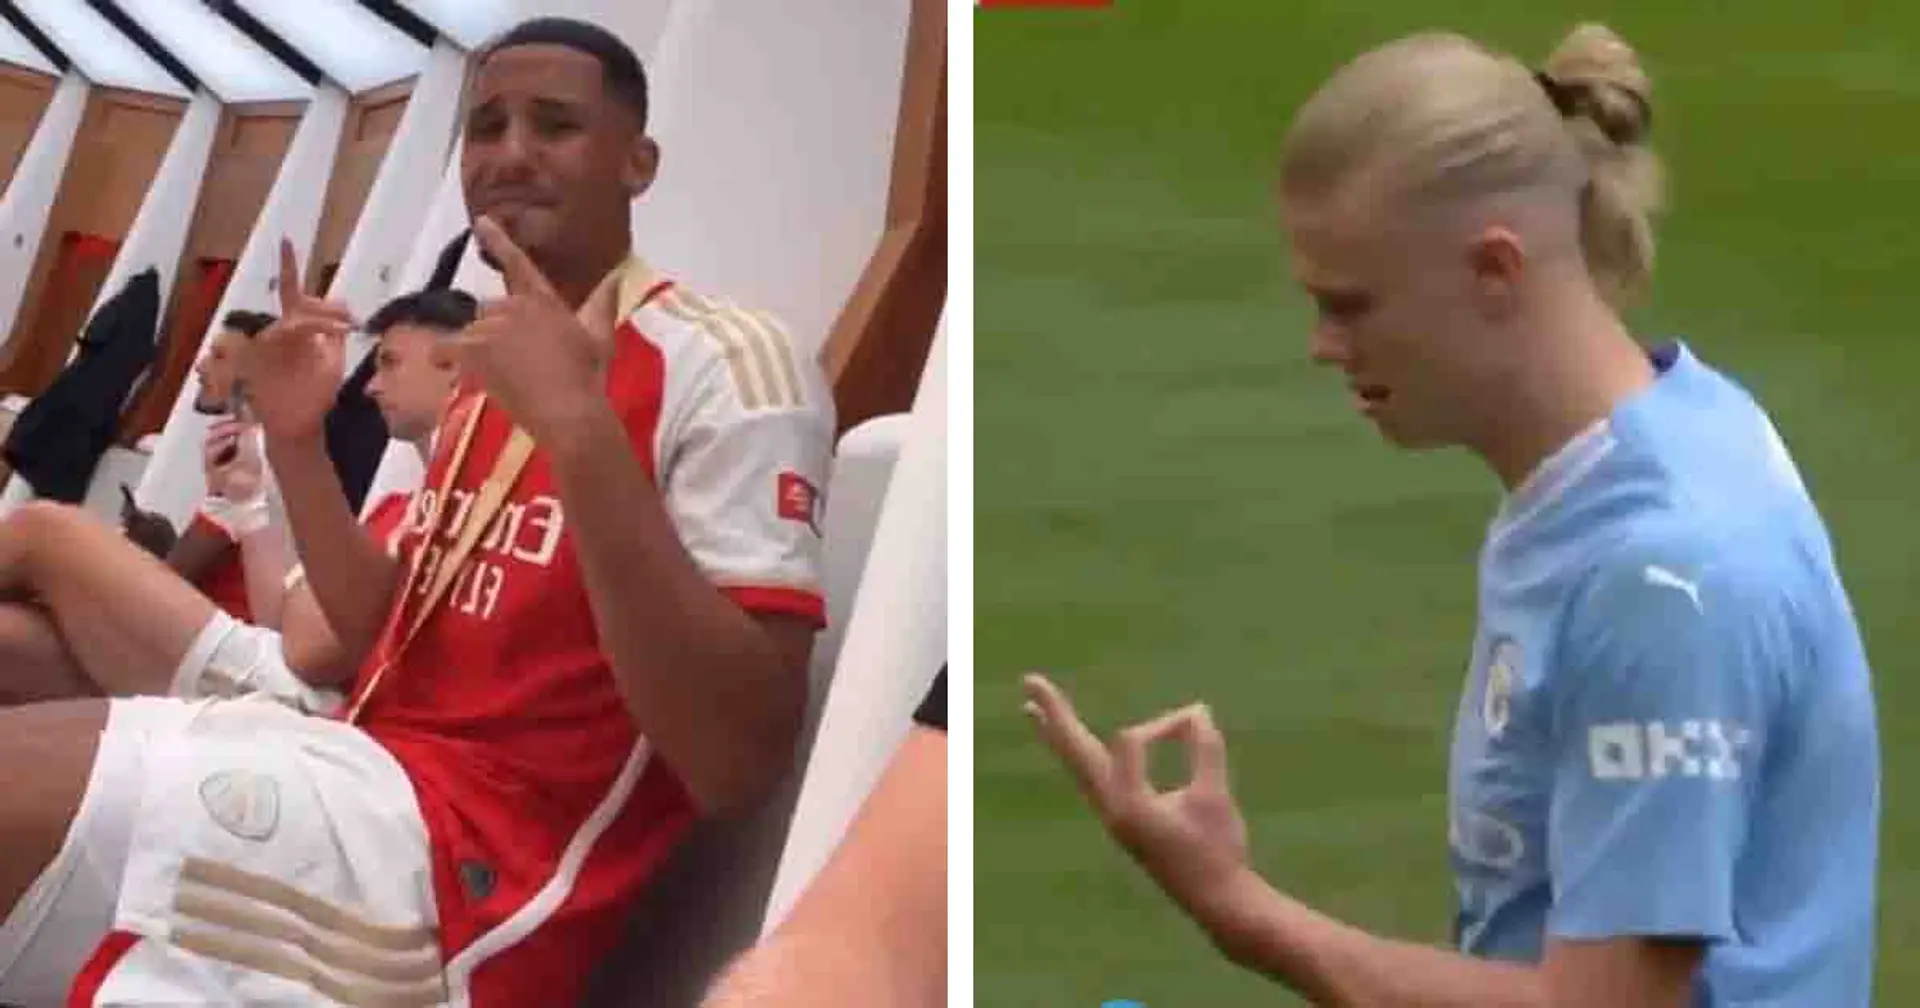 Haaland tries trolling Arsenal with cheeky gesture after substitution - but Gooners put him in his place